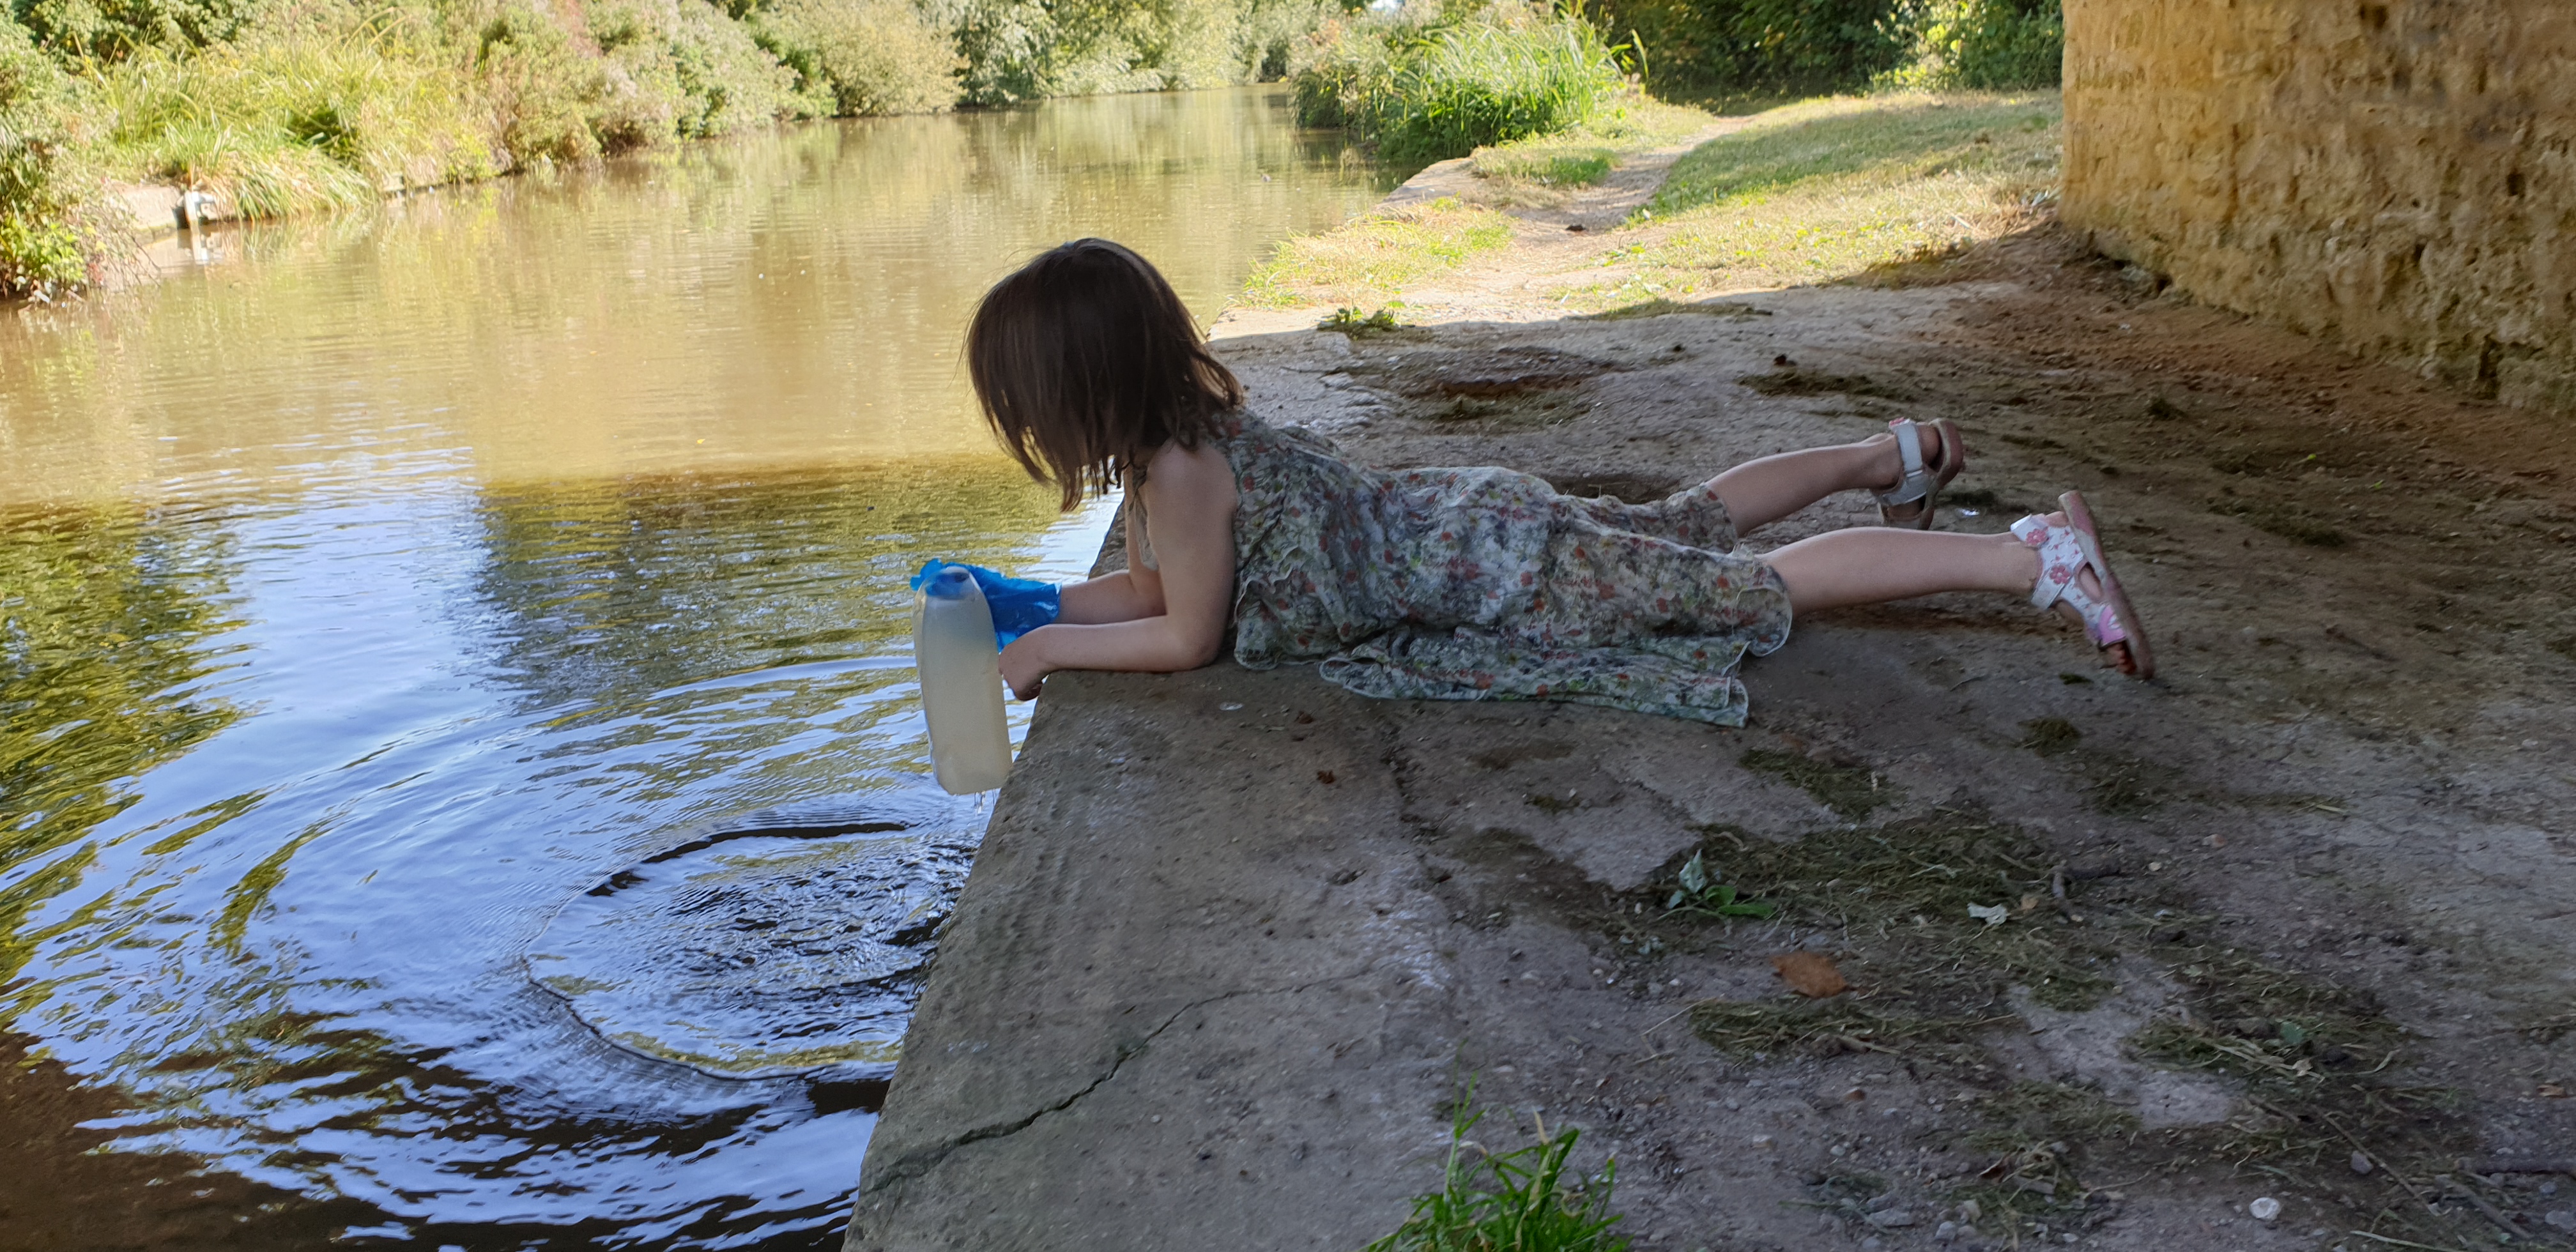 Annabel fetches water from the canal.